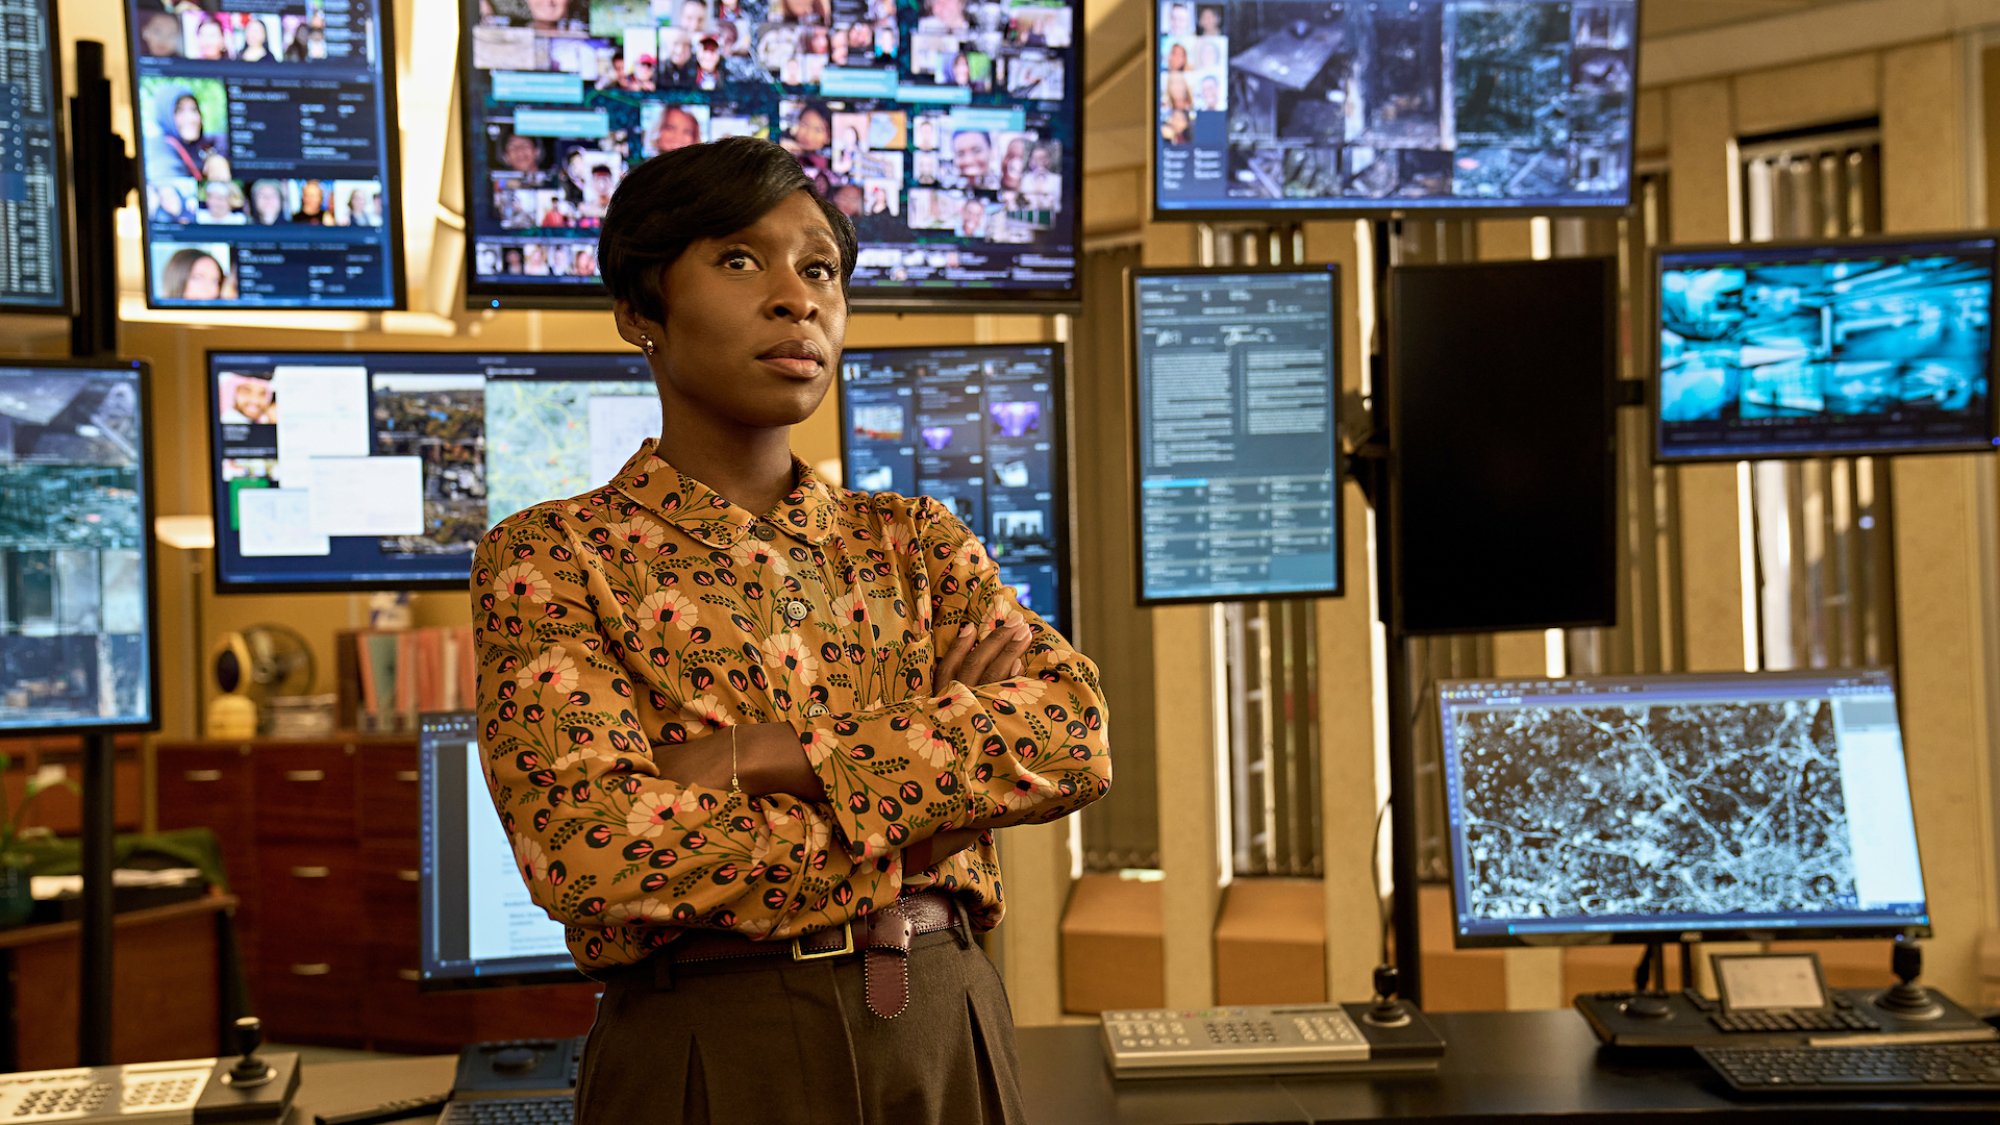 A woman in a patterned shirt stands in a police monitoring room with about 10 screens behind her showing various images and tracking information.